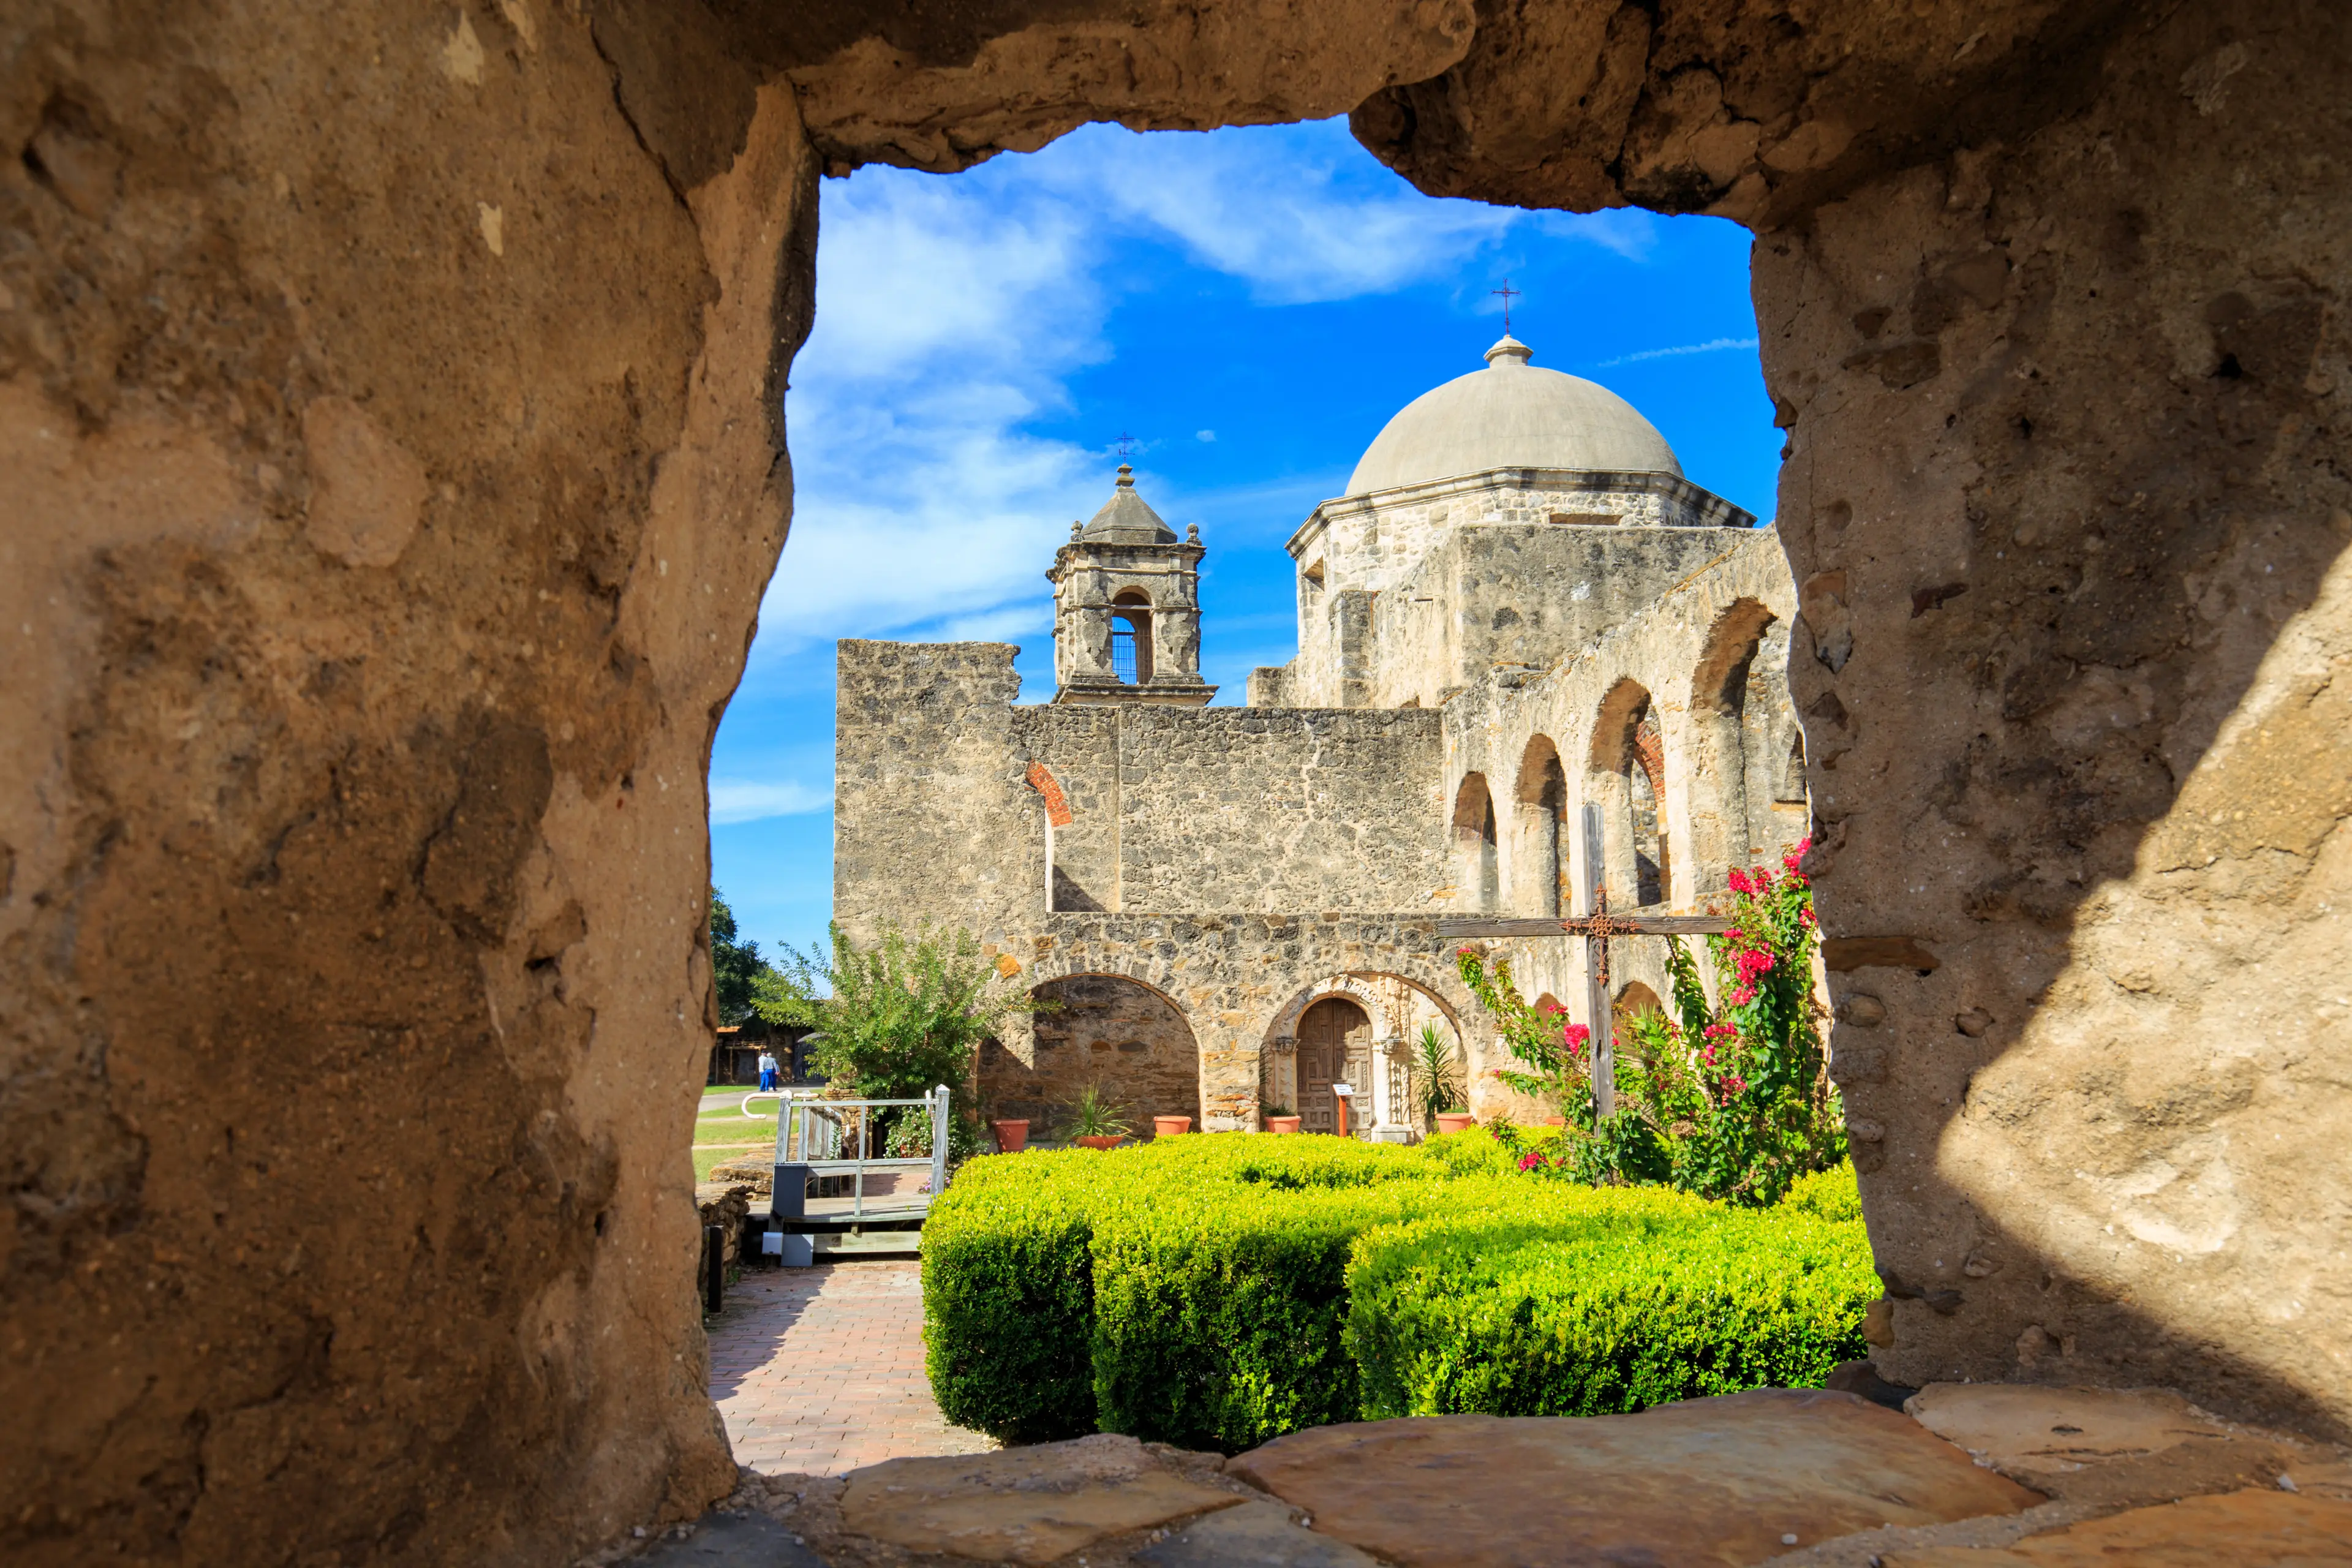 3-Day Romantic Food, Wine, and Sightseeing Tour in San Antonio